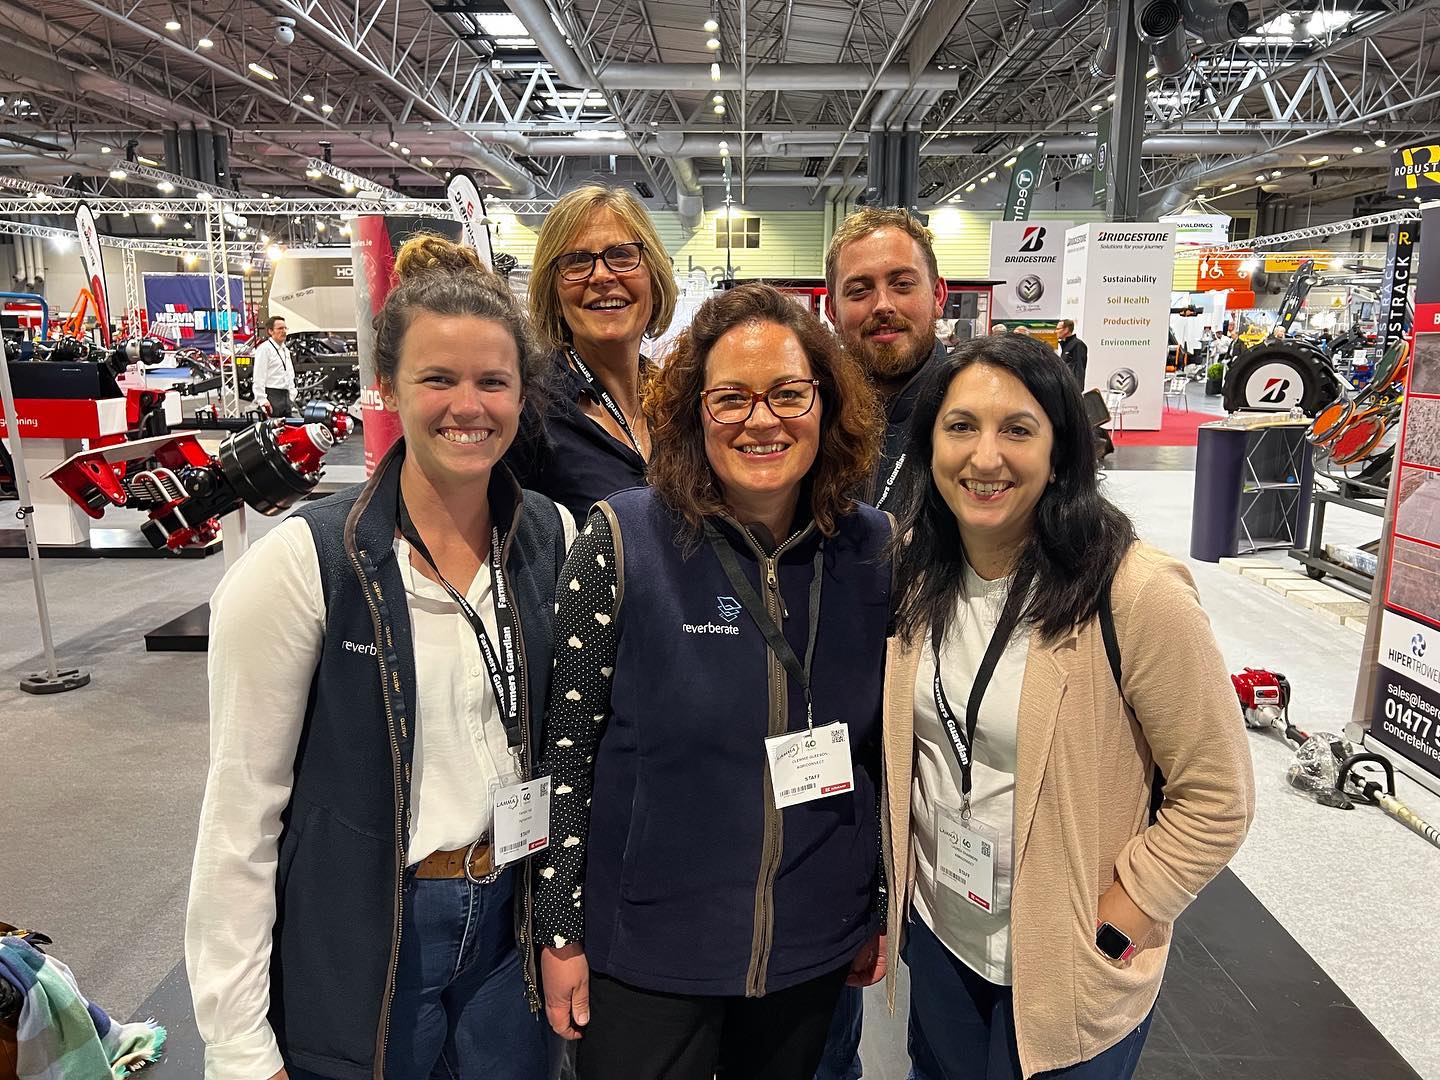 Day 1 of @lammashow is in the books! #LAMMA22 has been a real success so far, and we’re grateful for everyone that has played a part in making it so. 

Between the 5 of us, we clocked up more than 58,000 steps… the @necbirmingham is not for the faint of heart! Totally worth it though 😁

#agritech #clubhectare #eventsareback #eventslife #agricomms #getyourstepsin